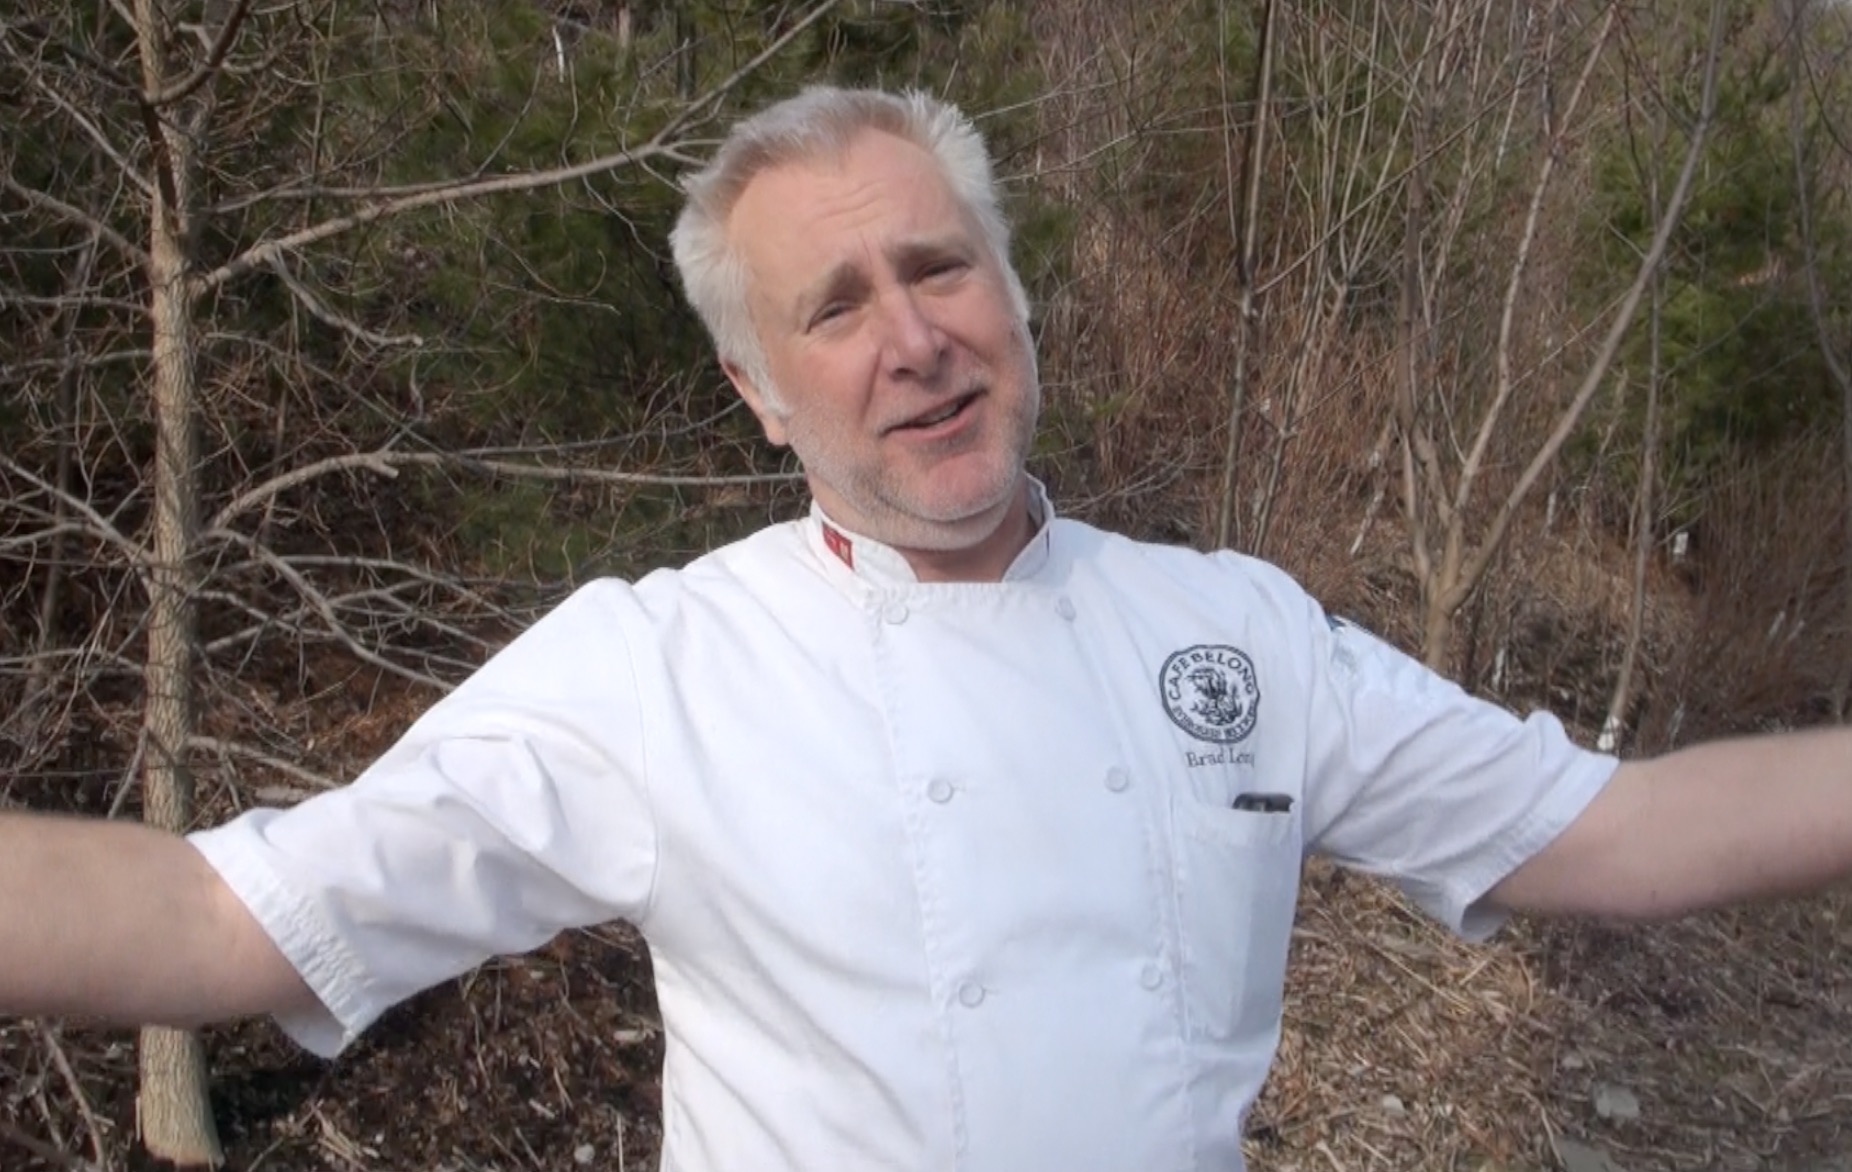 Chef Brad Long is passionate about foraged Ramps and Fiddleheads, but warns us of some nefarious  practices regarding their harvesting.